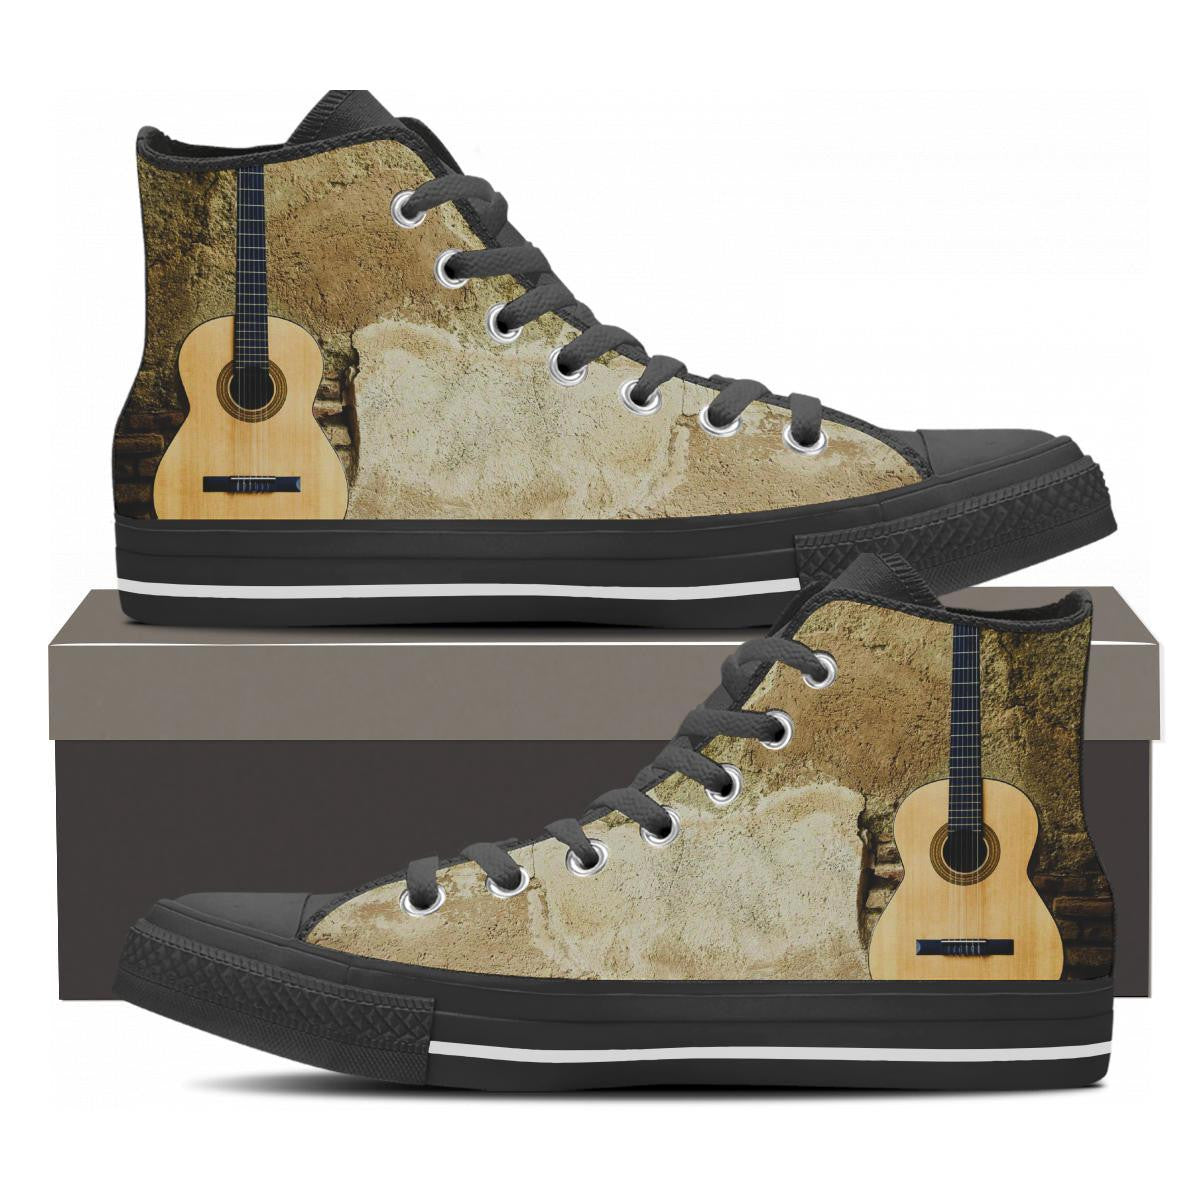 Guitar High Tops - Cool Tees and Things